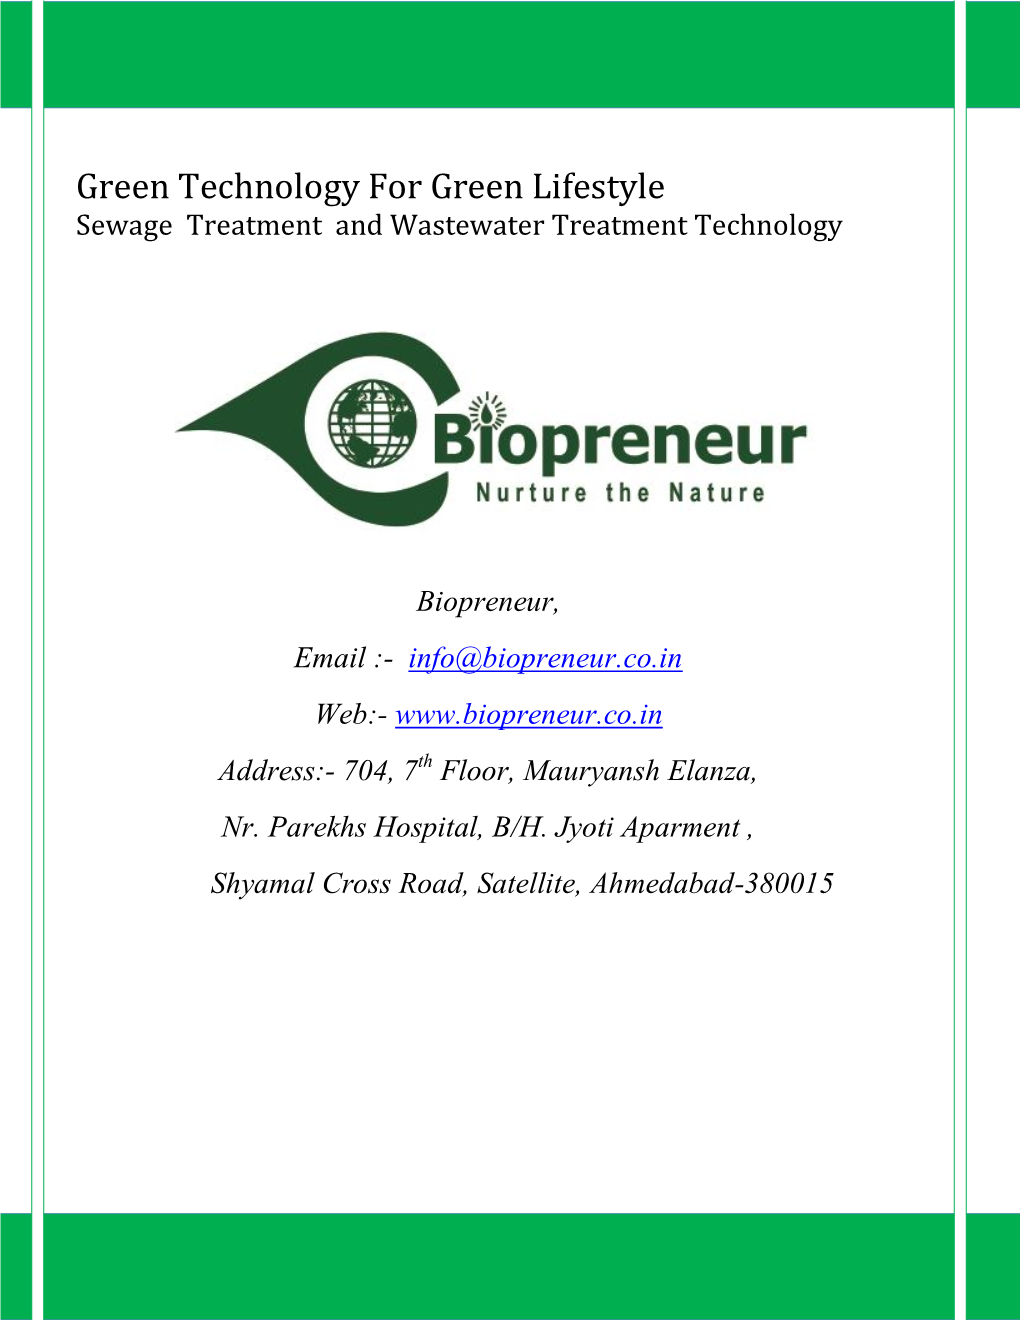 Green Technology for Green Lifestyle Sewage Treatment and Wastewater Treatment Technology